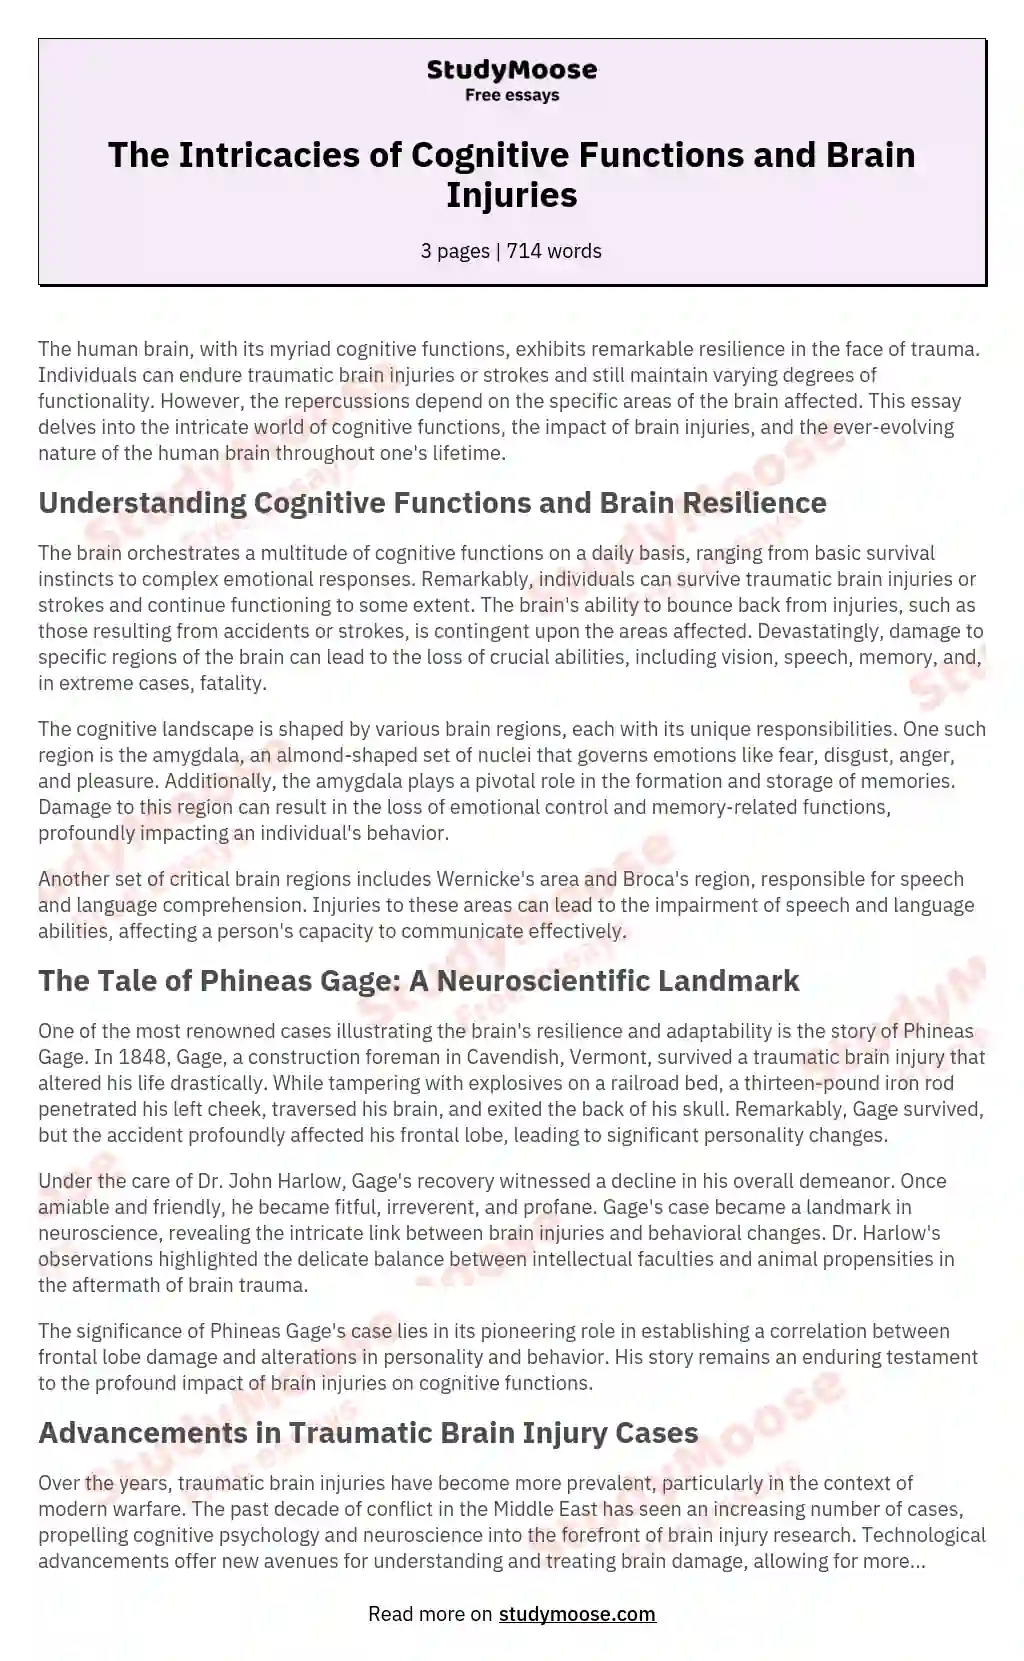 The Intricacies of Cognitive Functions and Brain Injuries essay